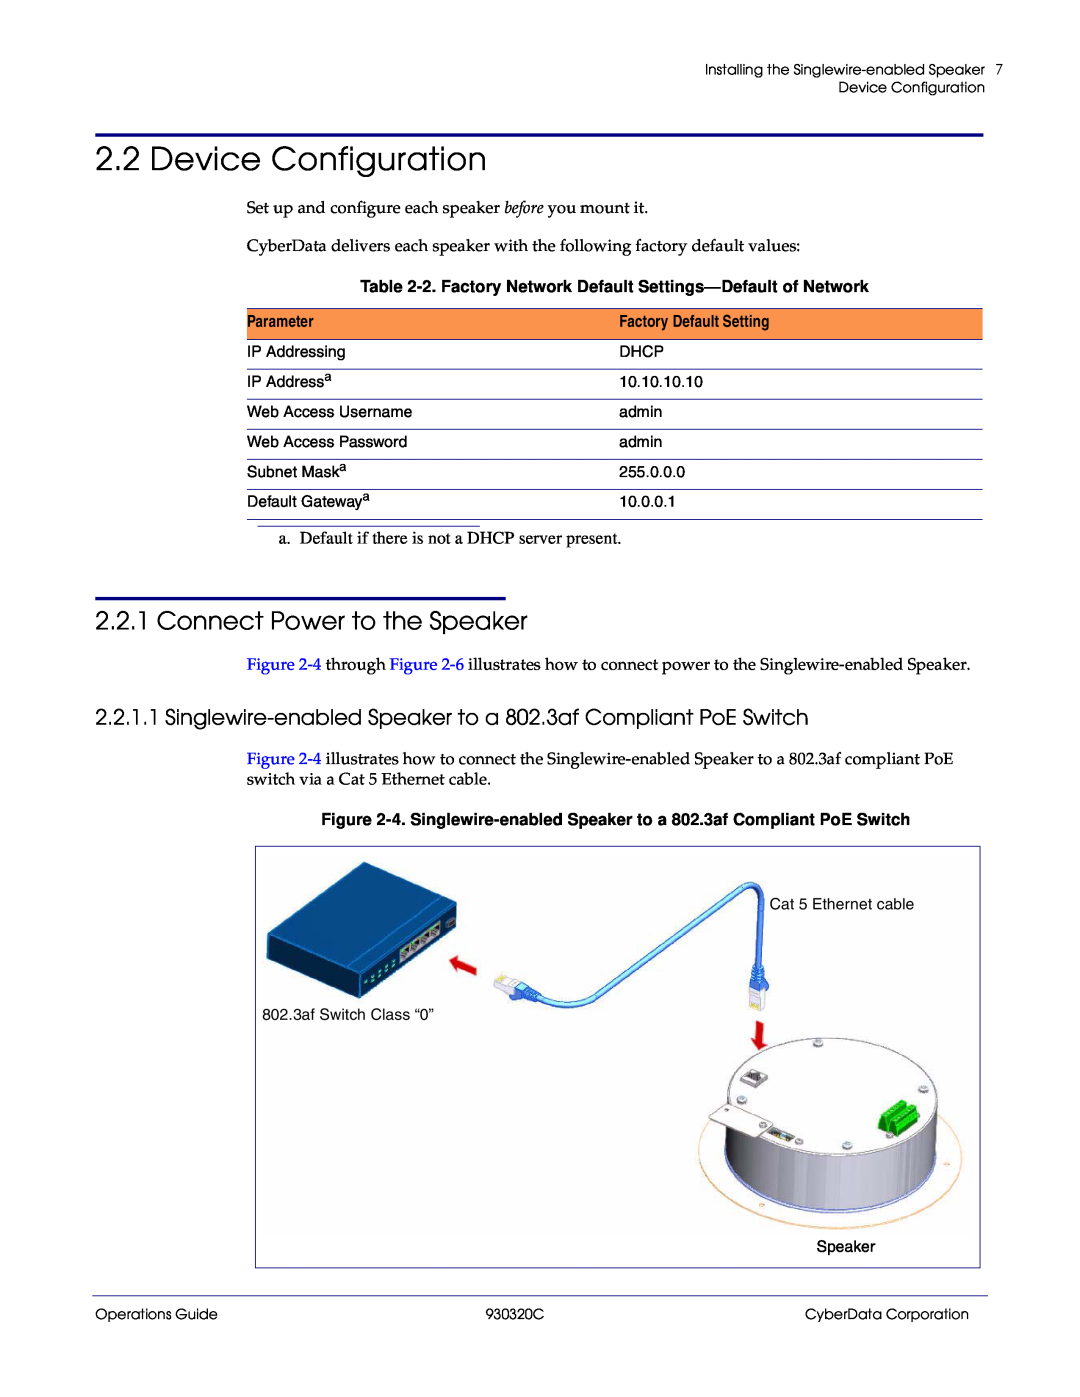 CyberData 11103 manual Device Configuration, 2.2.1Connect Power to the Speaker, Parameter, Factory Default Setting 